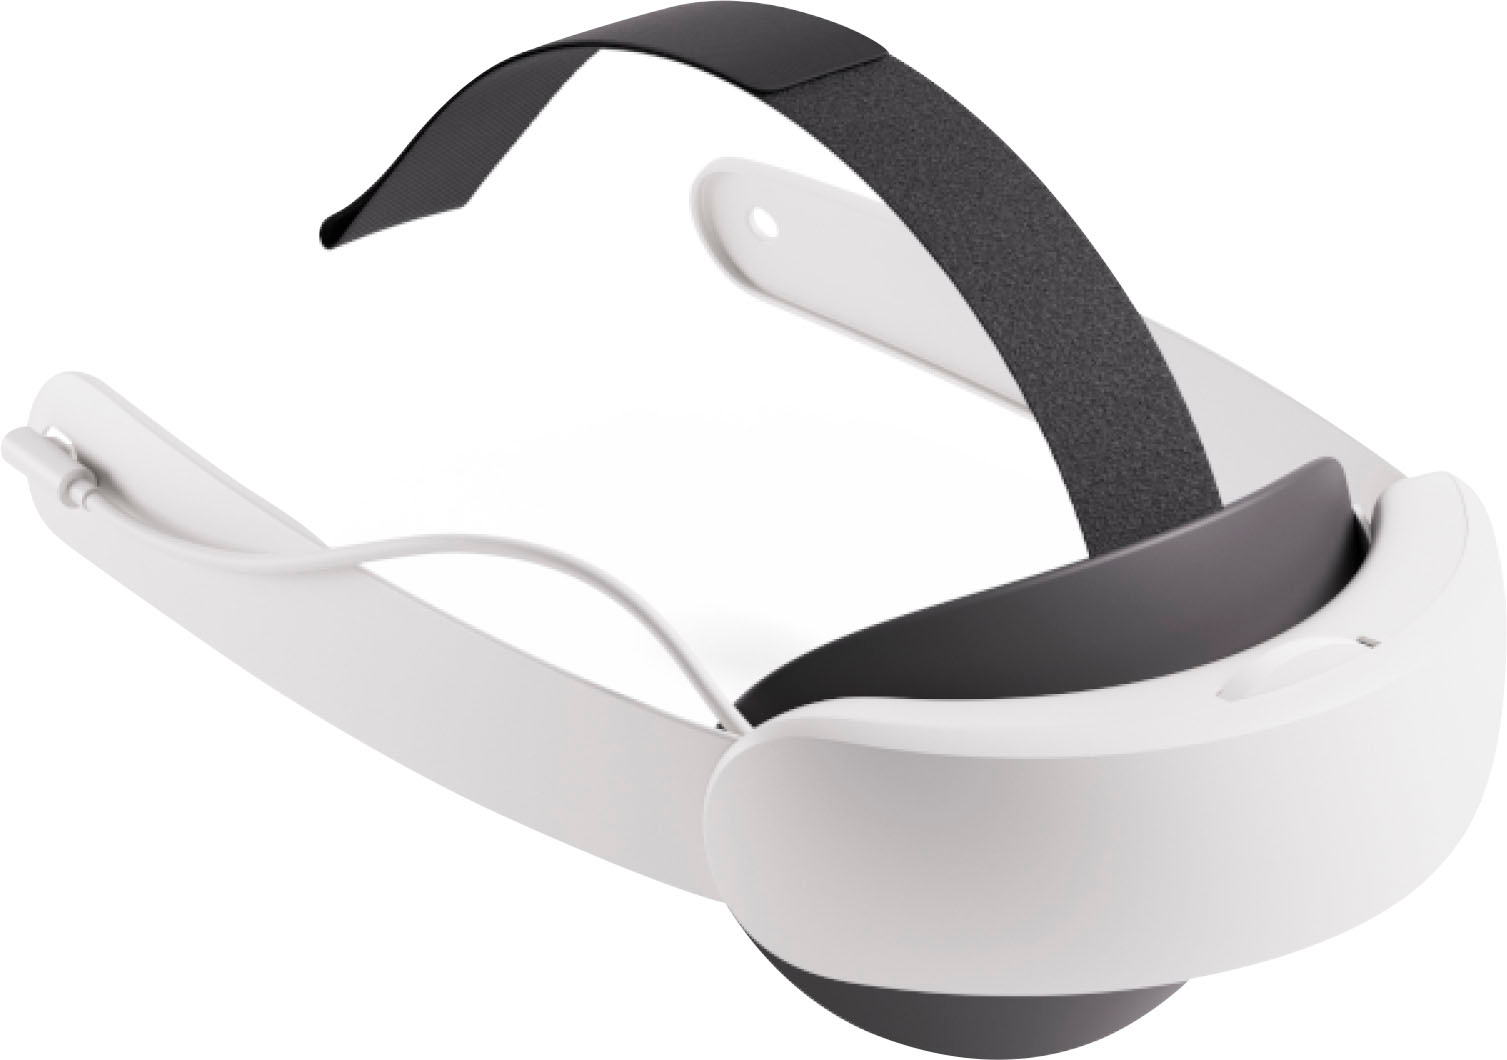 VRCover Quest 2 Replacement Headstrap Impressions: A Viable Alternative